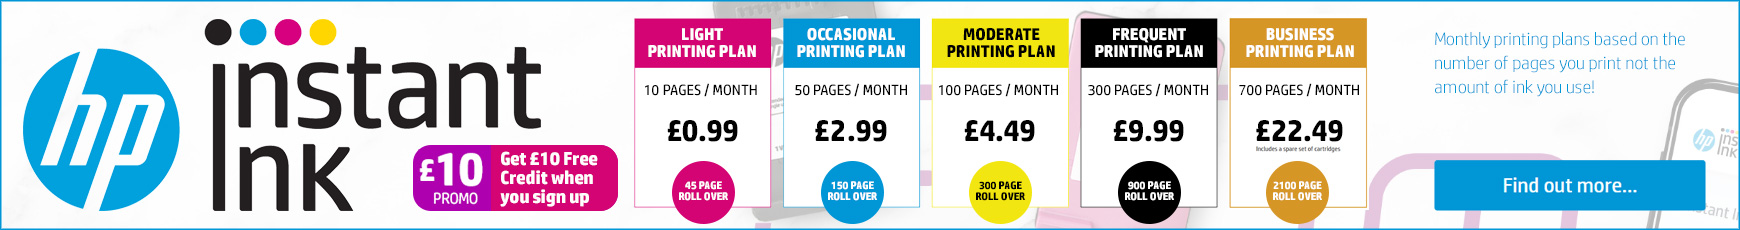 Find out more about HP Instant Ink